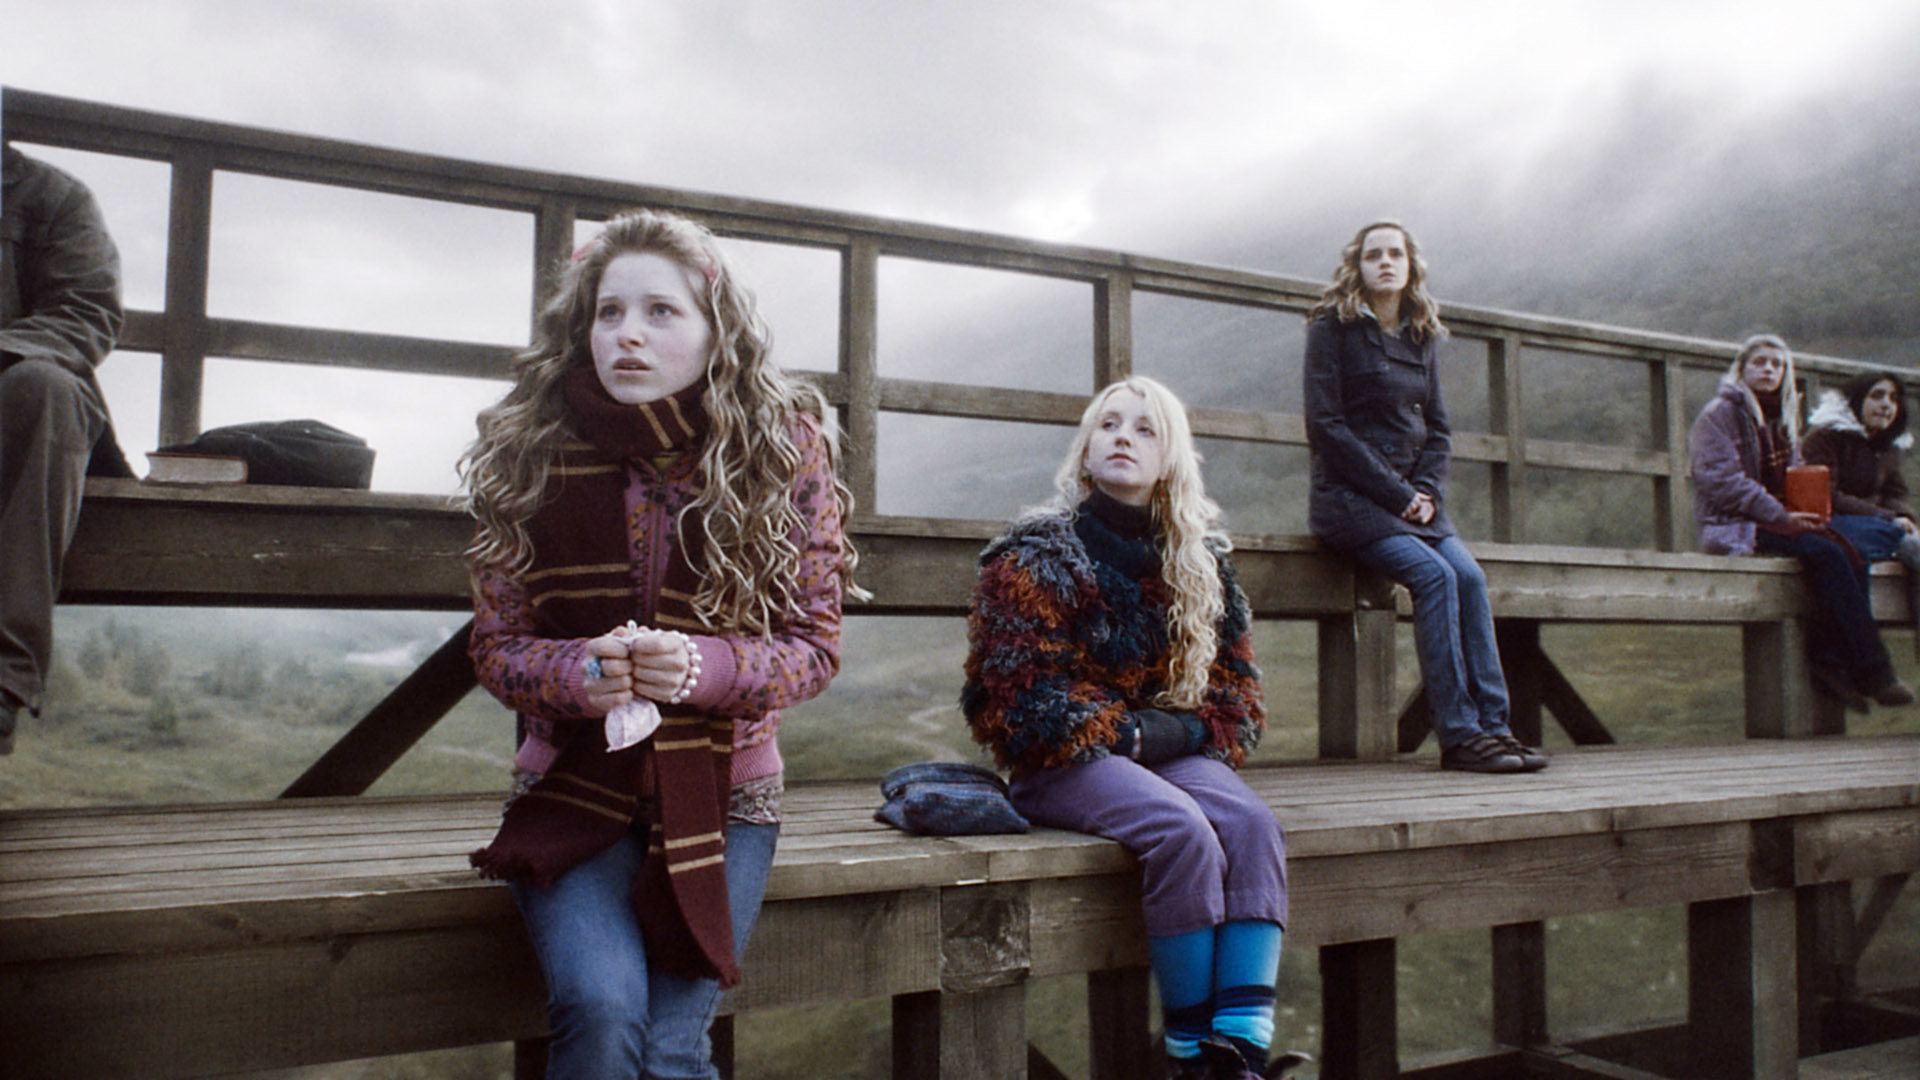 Emma Watson and Evanna Lynch and Jesse in a scene from Harry Potter, sitting on a bench looking concerned